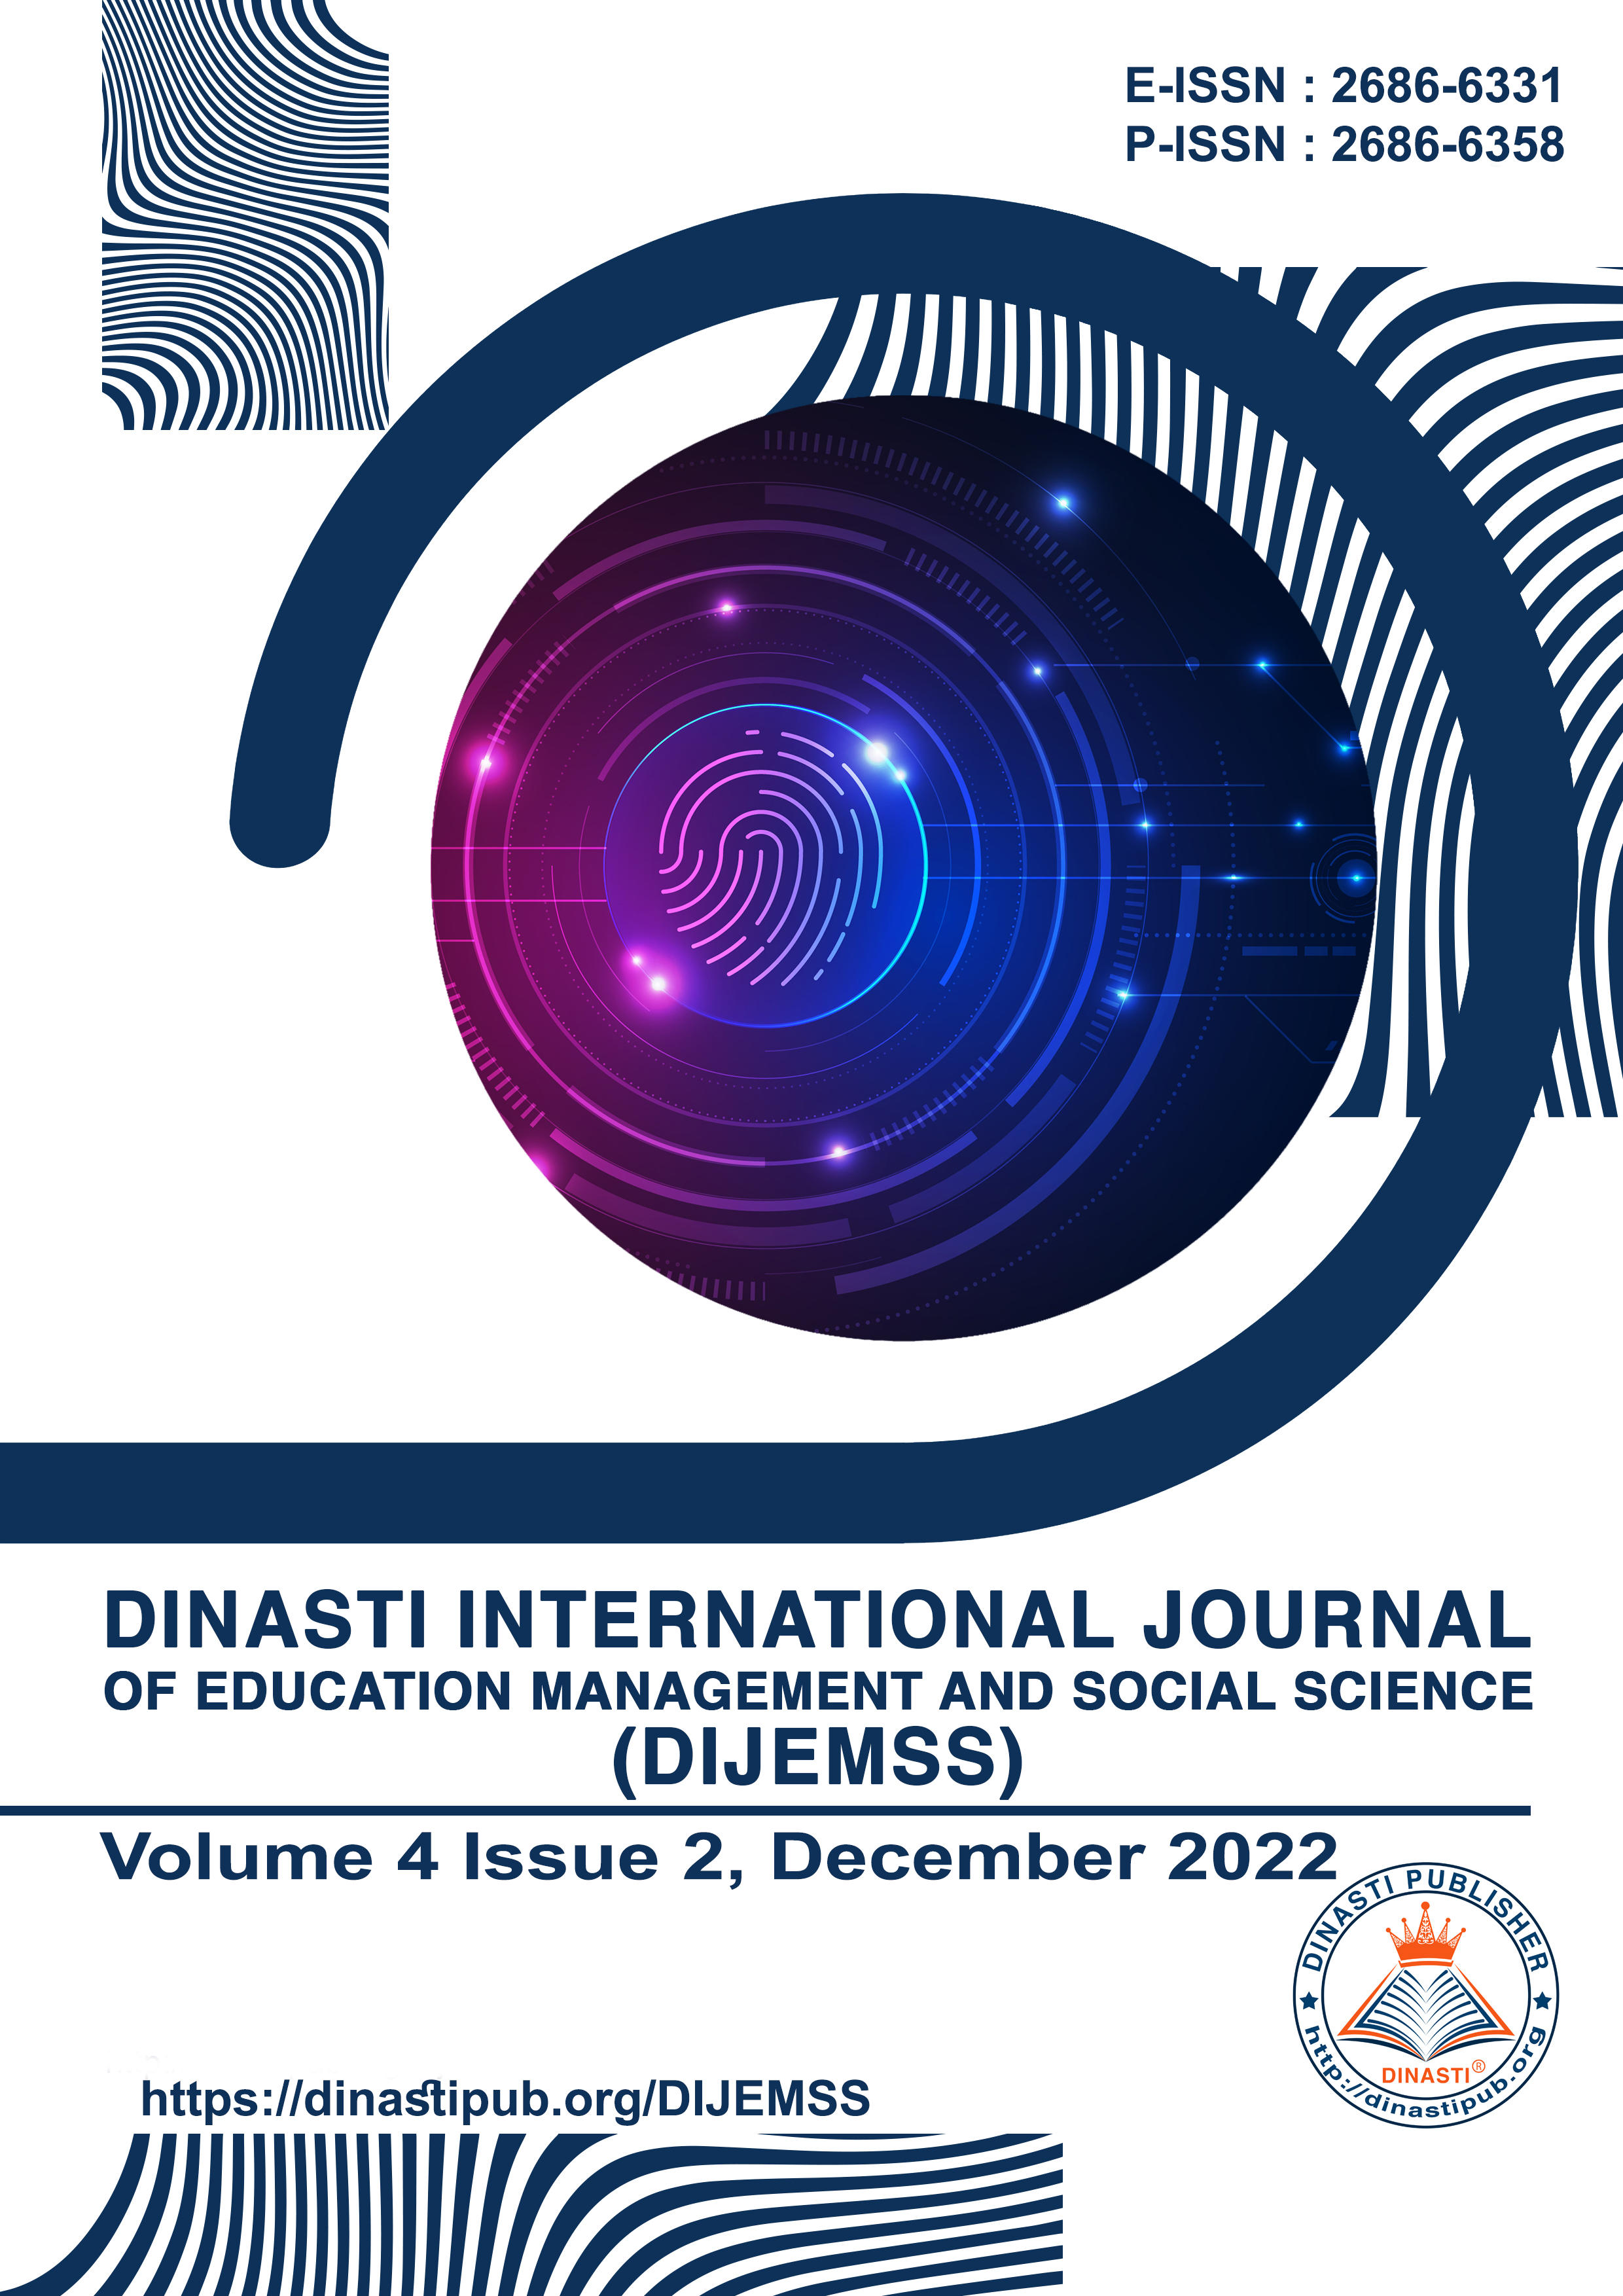 					View Vol. 4 No. 2 (2022): Dinasti International Journal of Education Management and Social Science (December 2022 - January 2023)
				